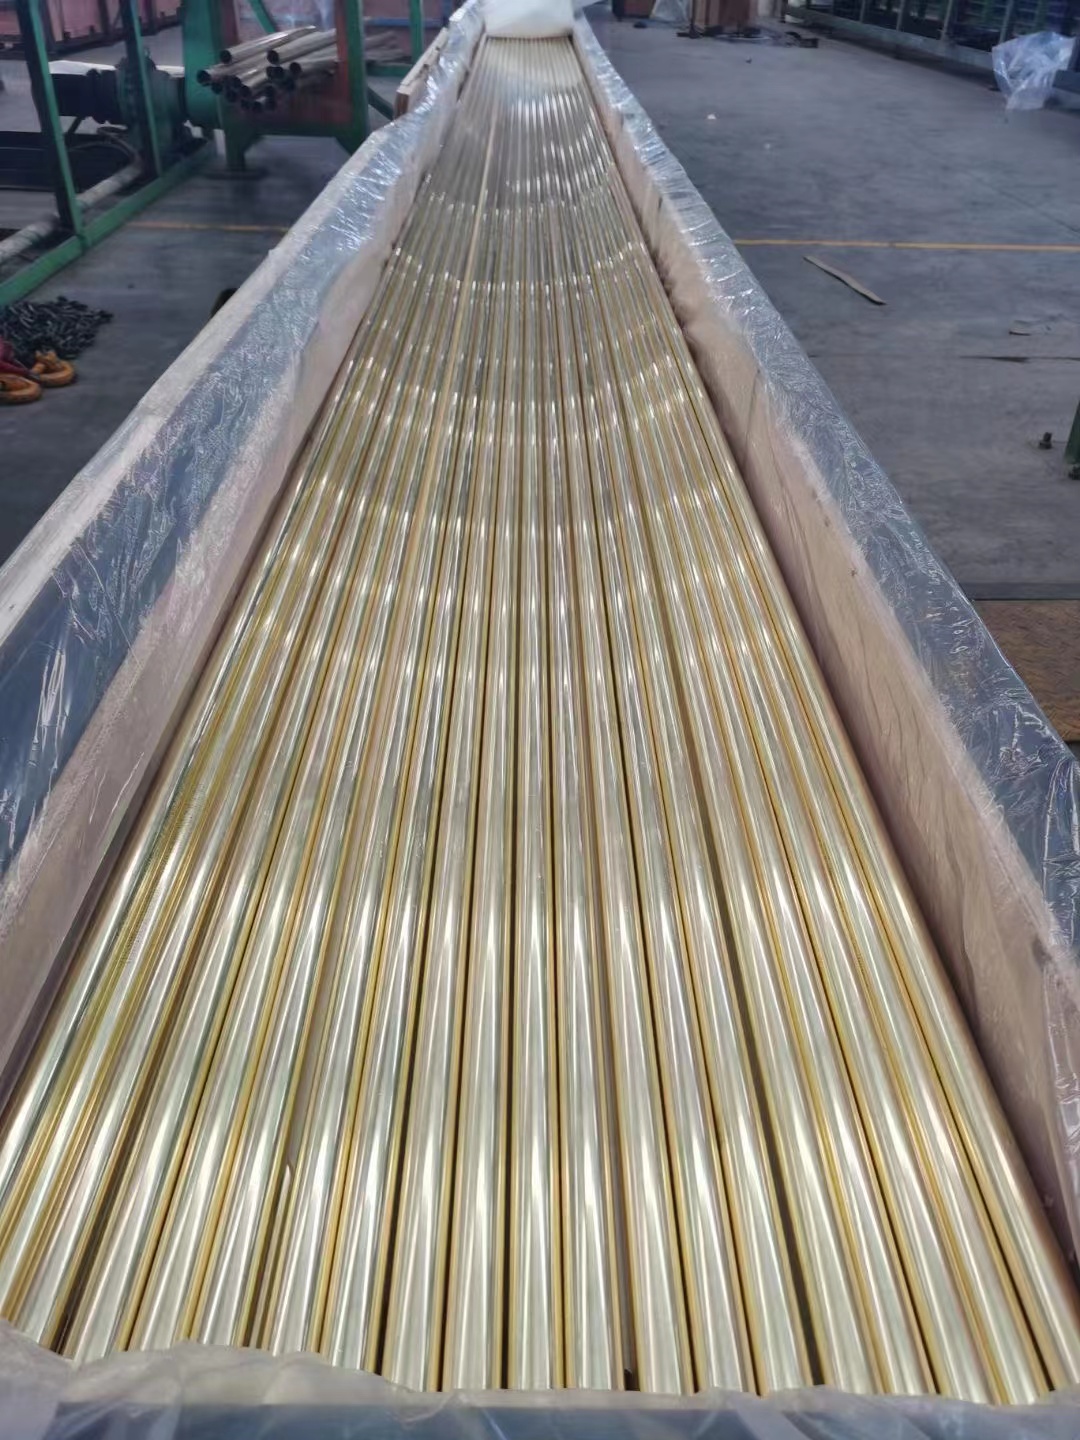 Newly Arrival 430 Stainless Steel Tube - ASTM B111 Admiralty Brass Tube for Condenser and Heat-Exchangers, Seawater Desalination, C68700, C44300, Eemua144 Uns C7060X C70600, CuNi 90/10, Uns C70620...